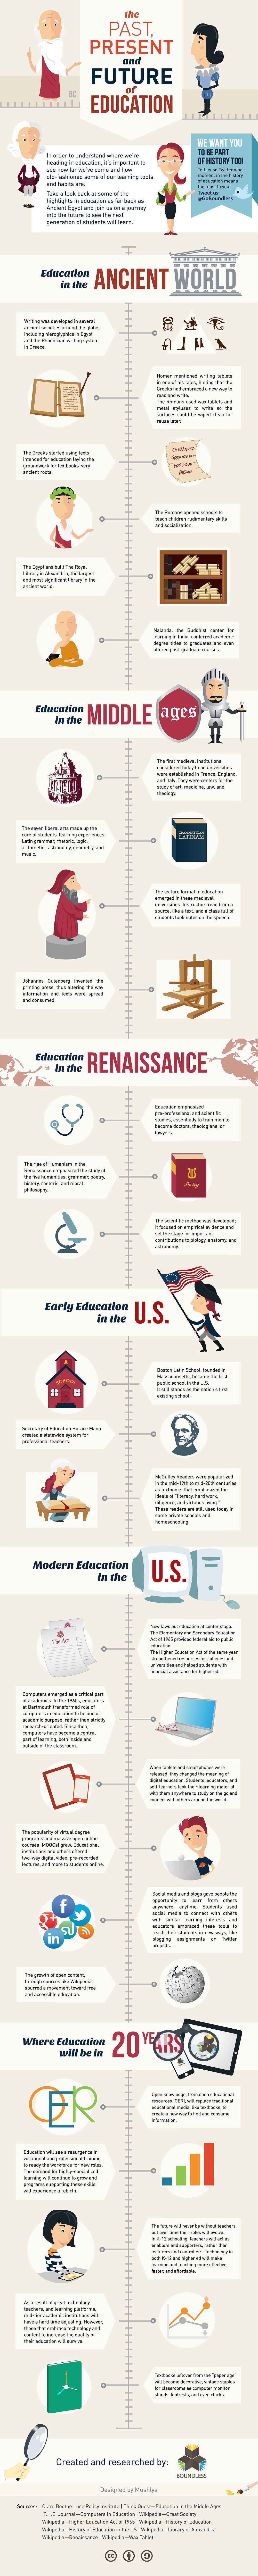 Infographic: The History of Education